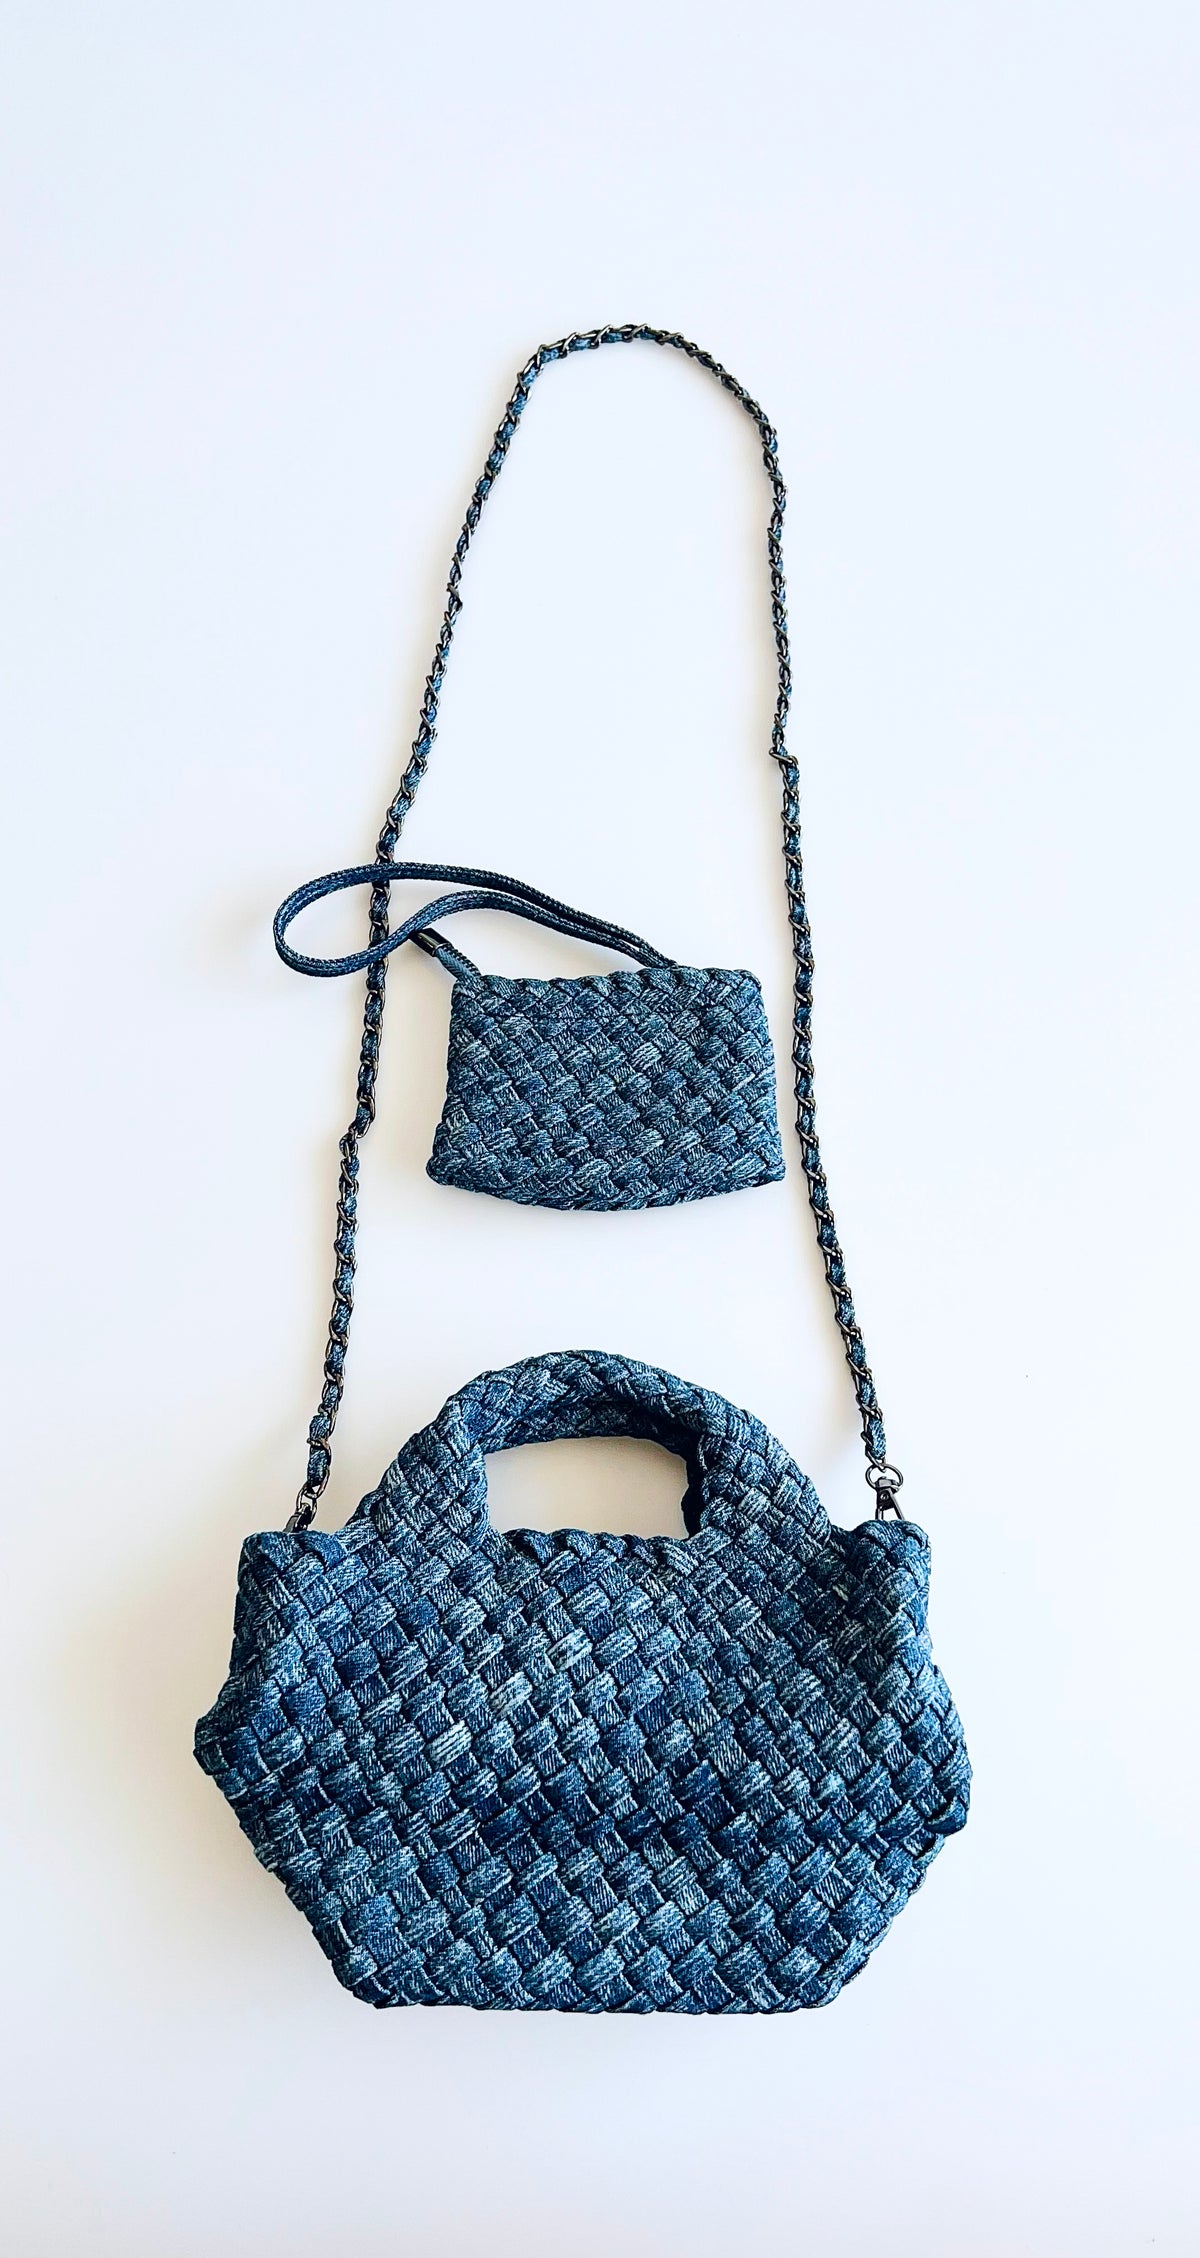 Denim Braided Handbag-240 Bags-BC Handbags-Coastal Bloom Boutique, find the trendiest versions of the popular styles and looks Located in Indialantic, FL